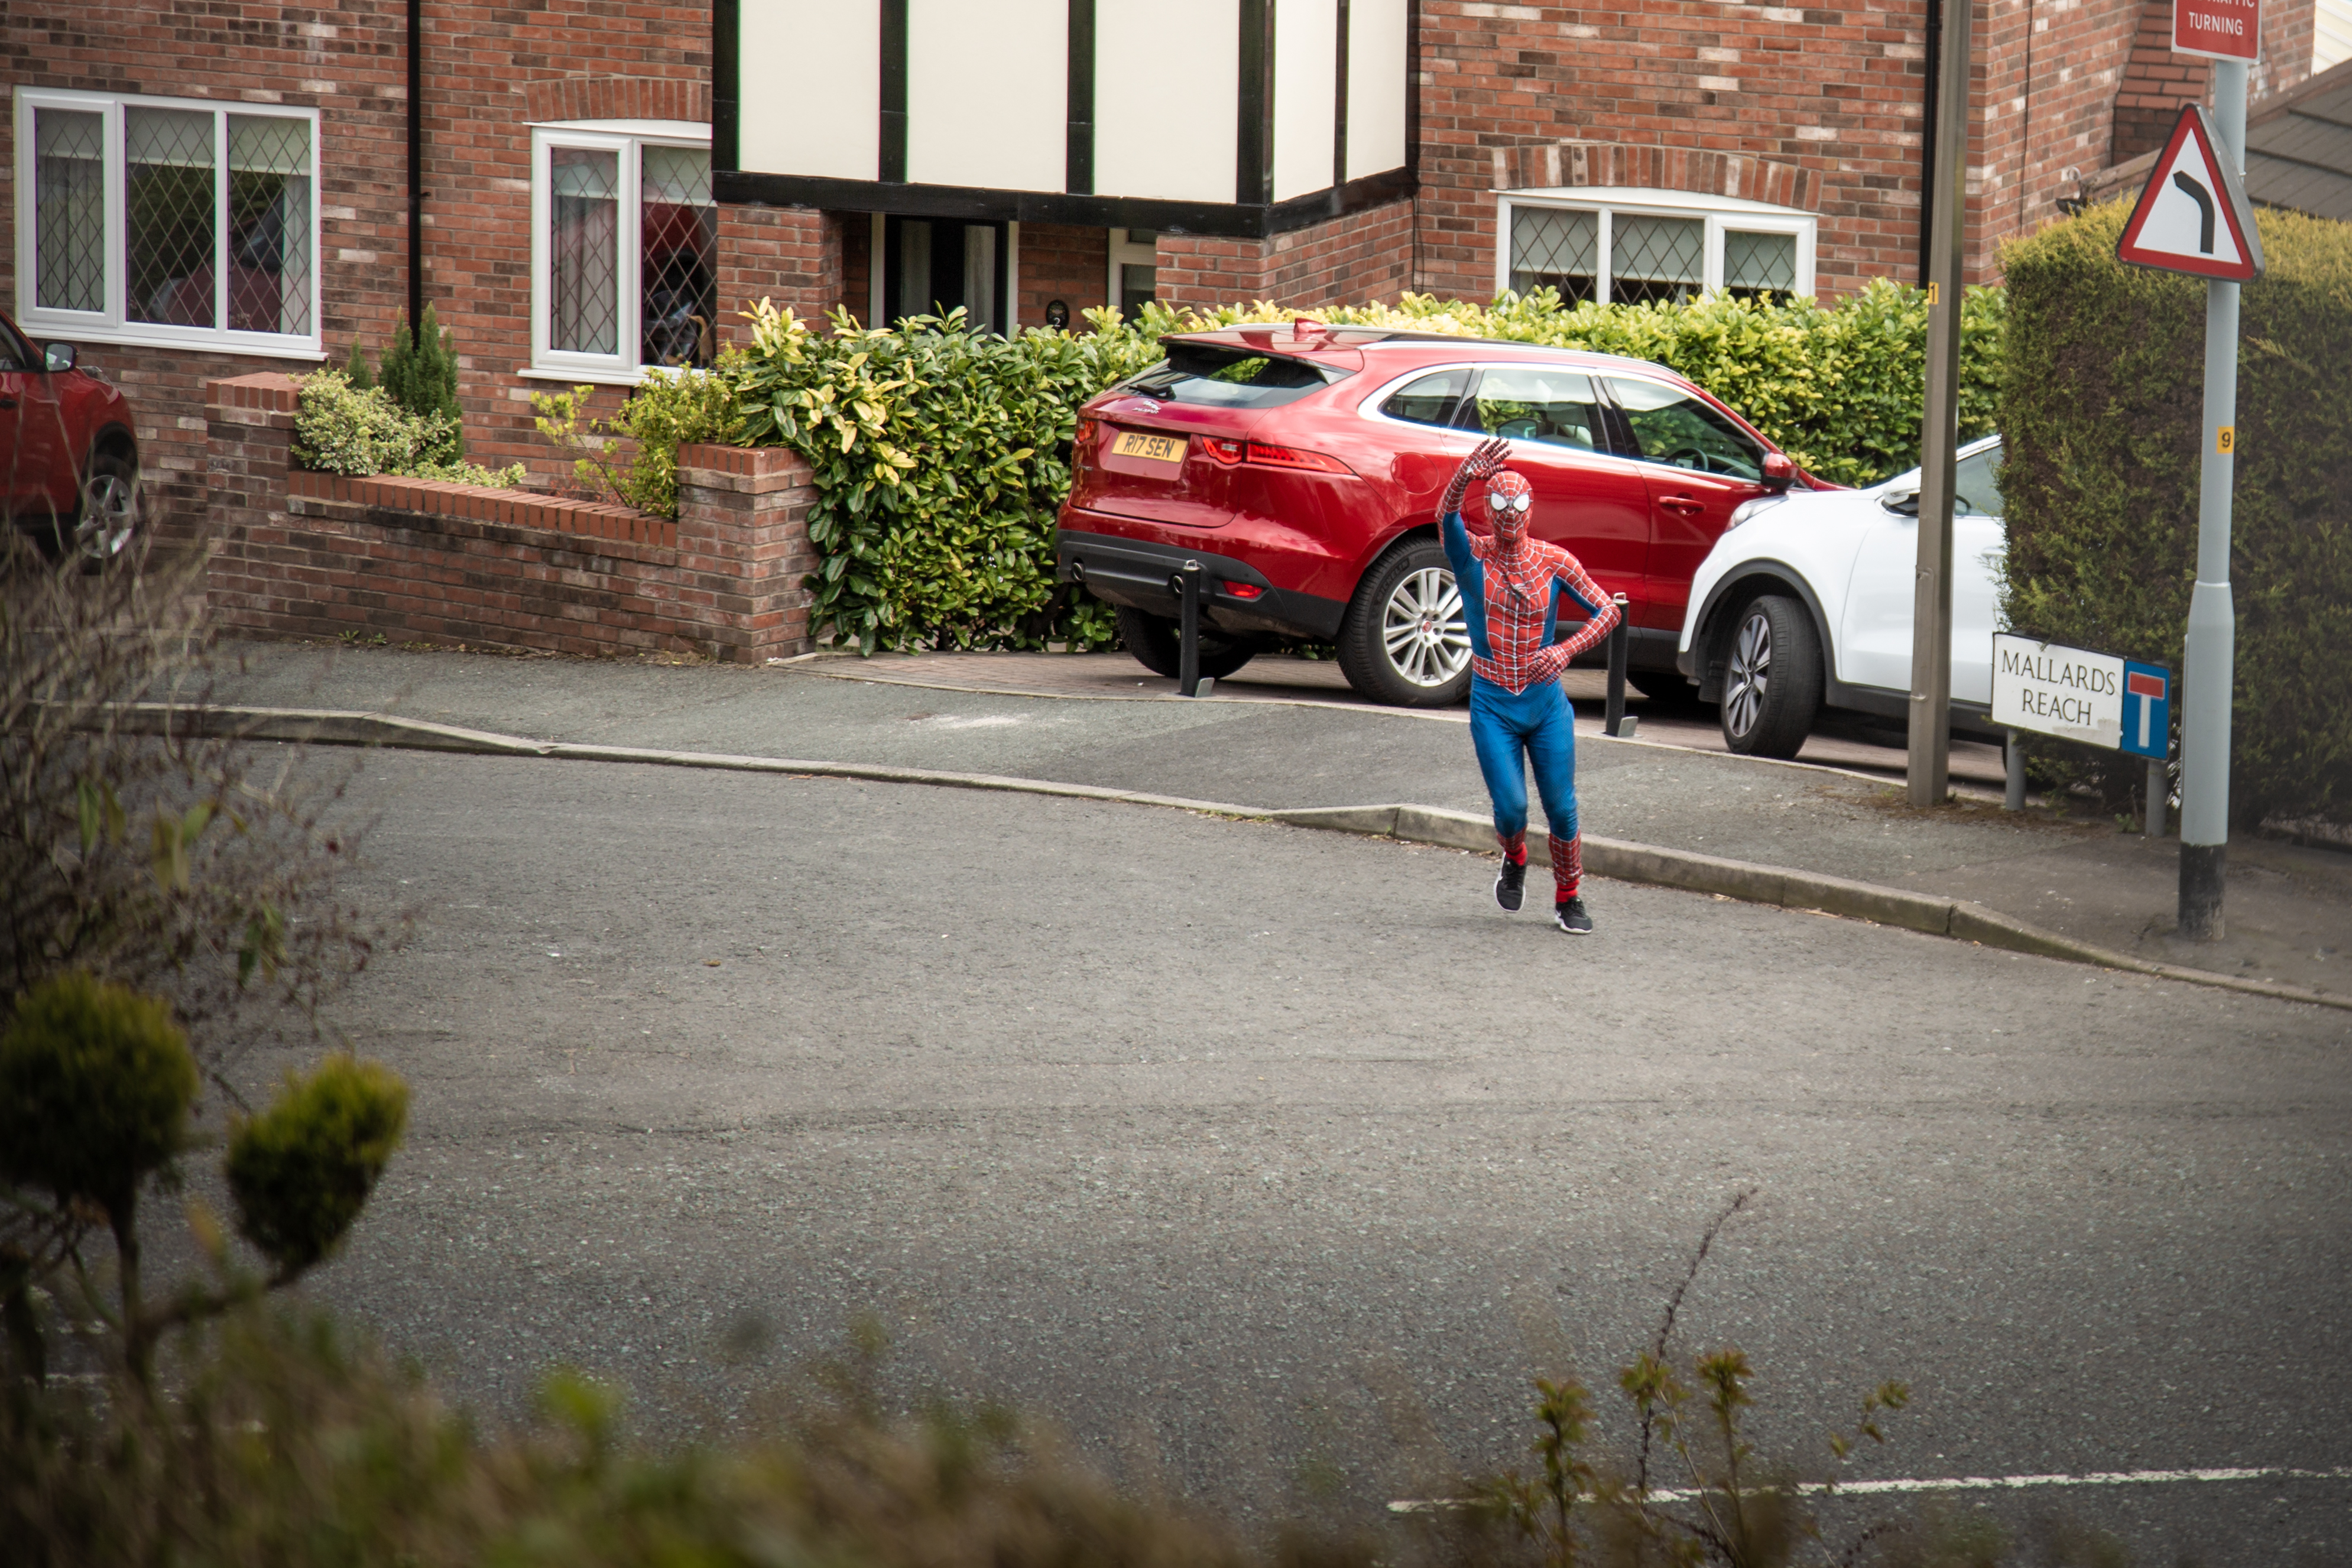 Jason Baird in the stockport area as spider-man